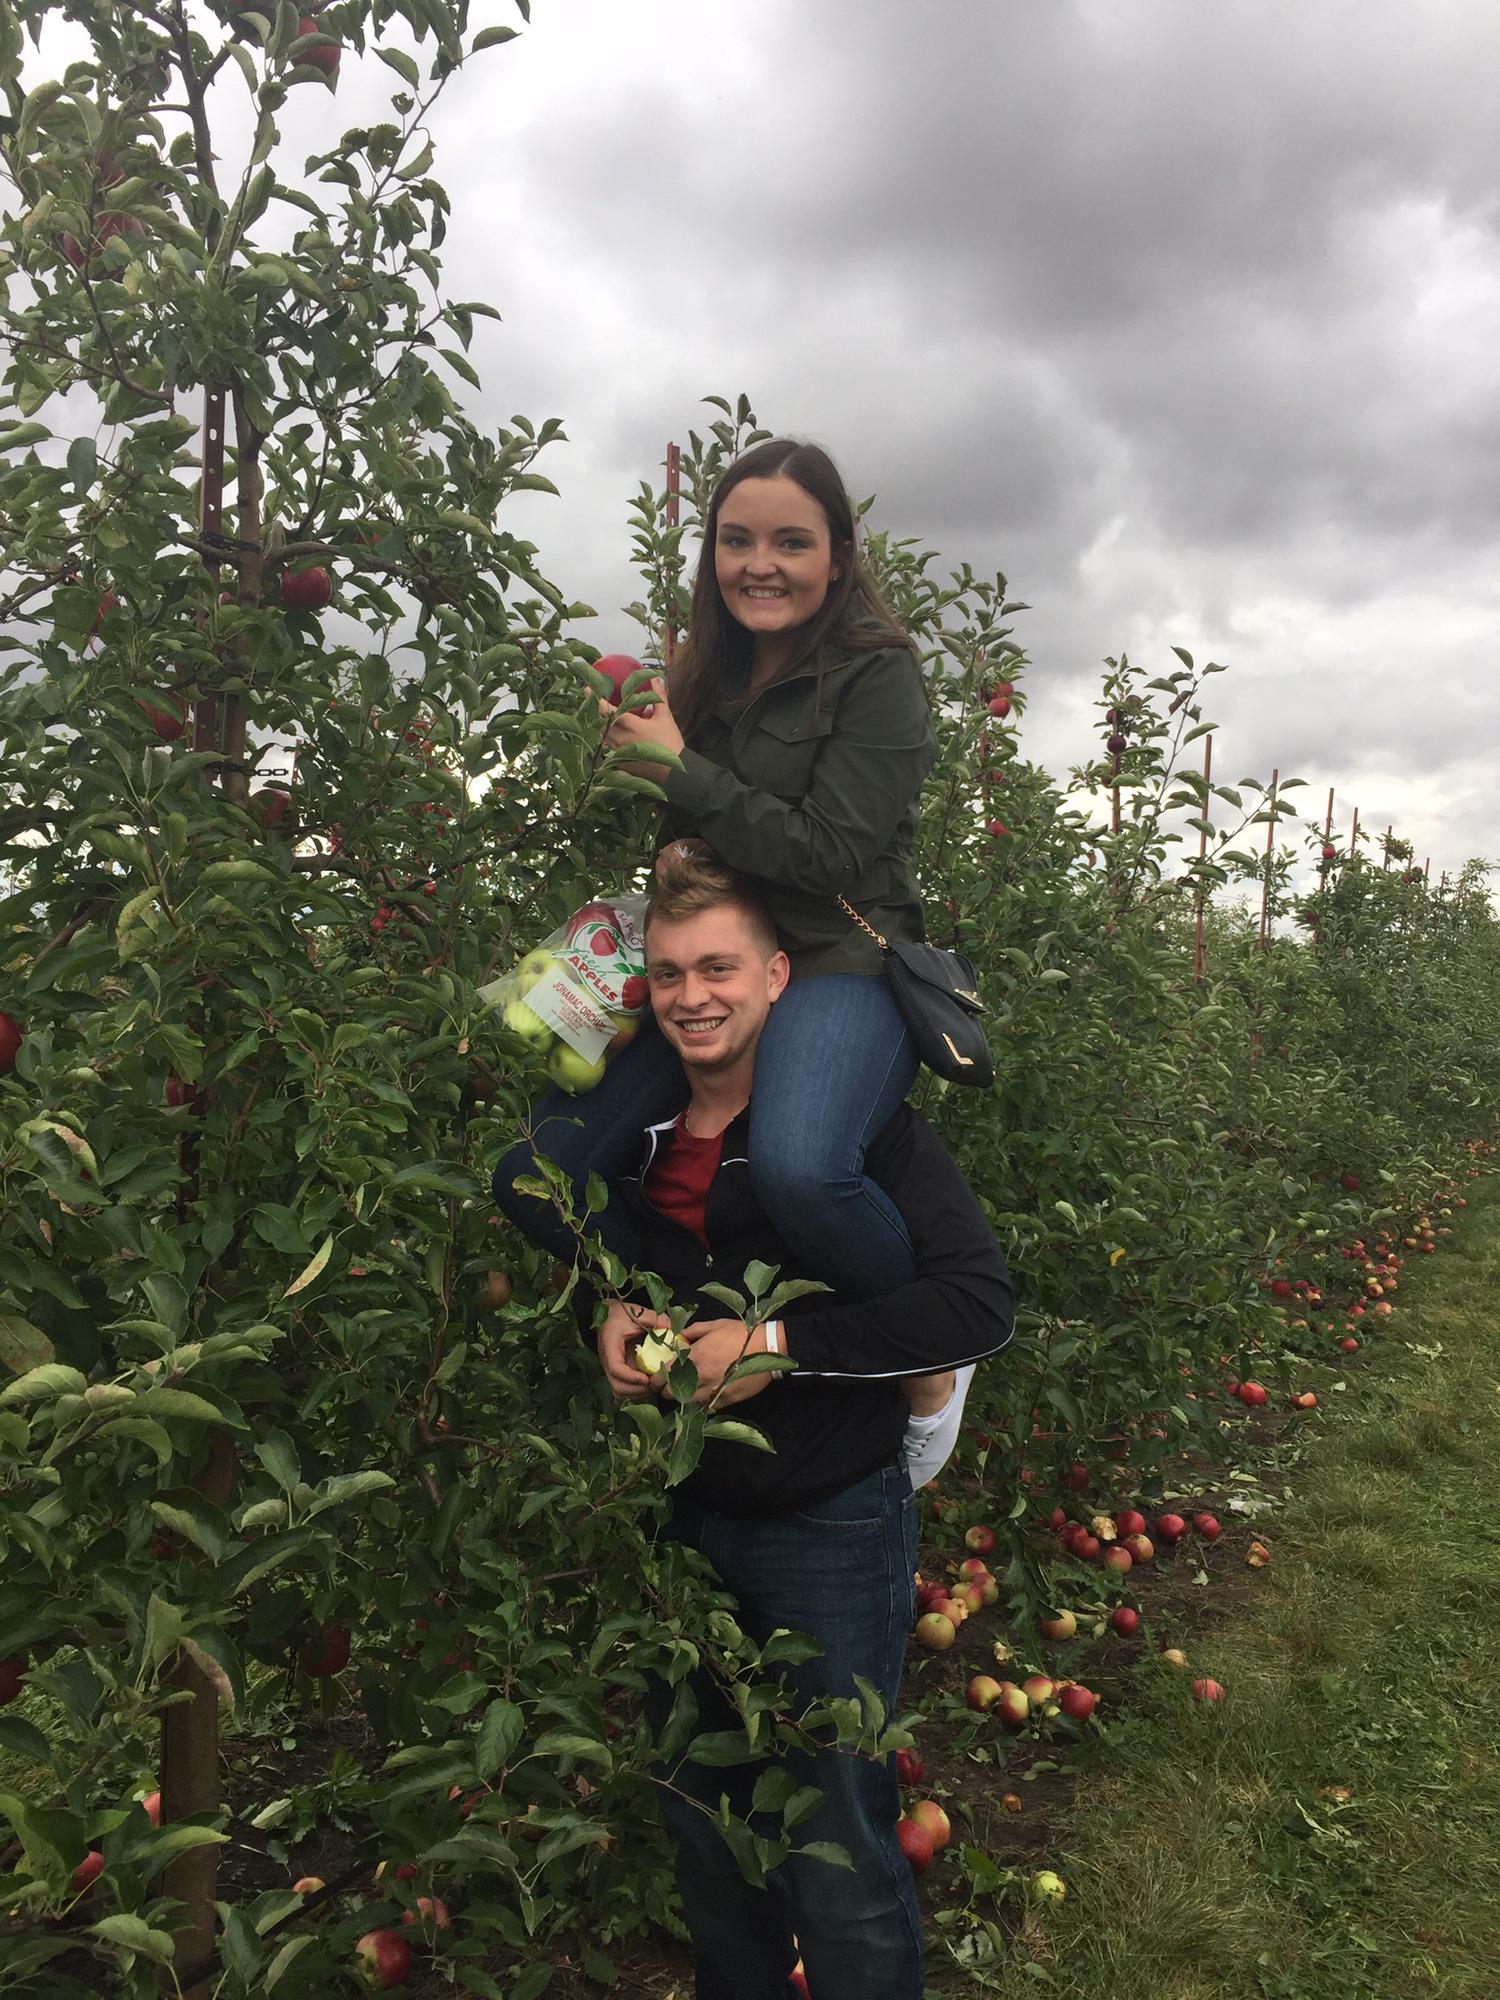 Our first of many trips to Jonamac orchard, and the start of a yearly apple picking tradition.